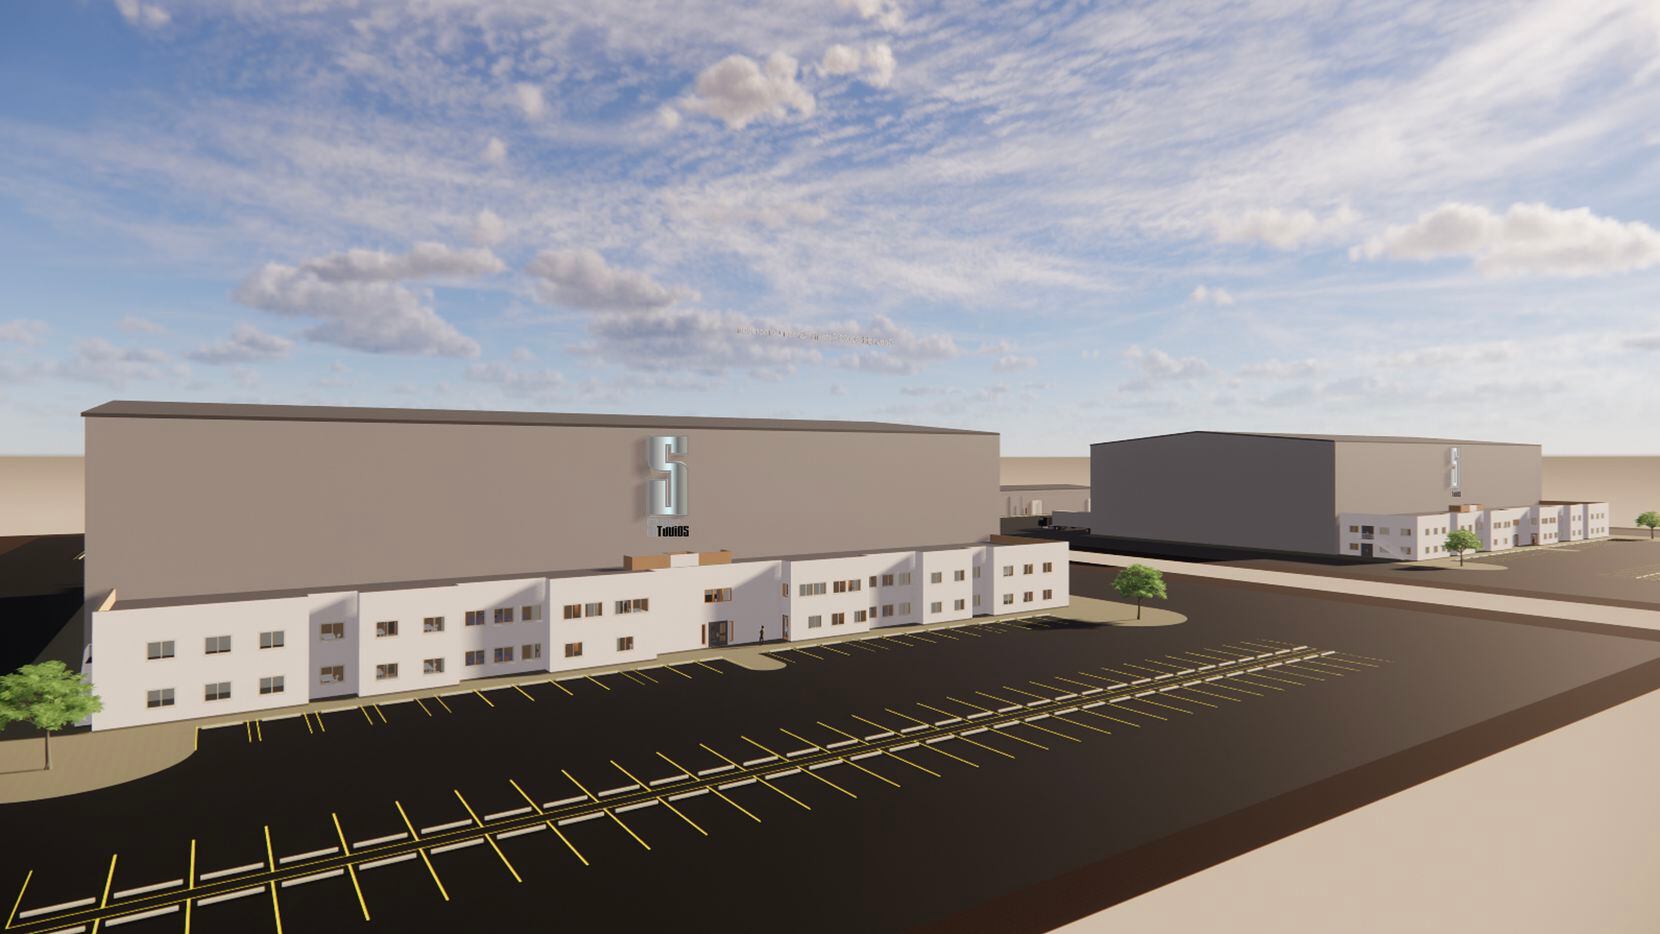 A rendering of the proposed Super Studios production facility in Mansfield.